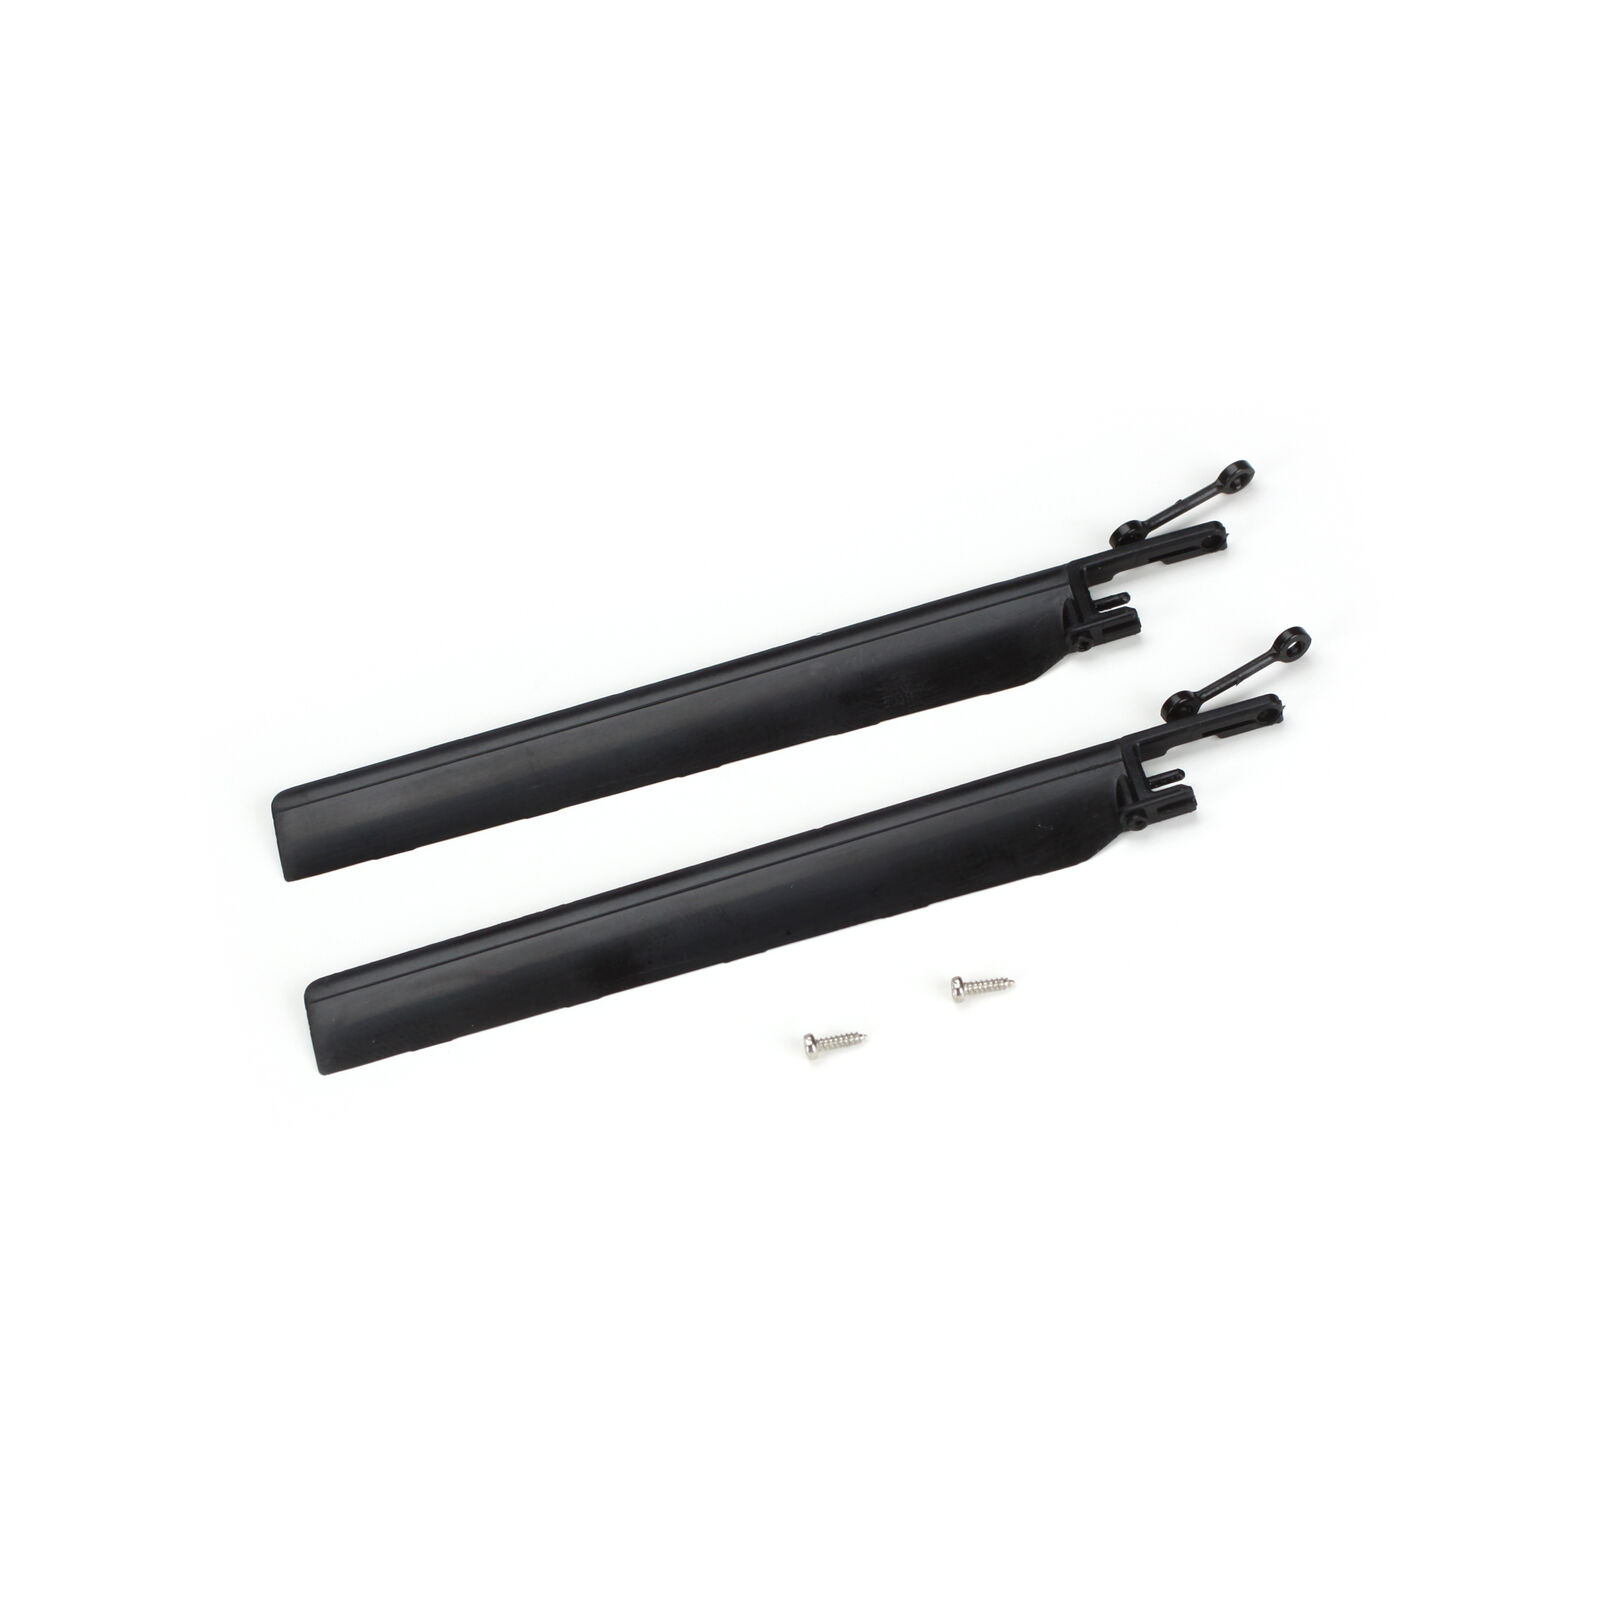 Lower Main Blade Set (1 pair): Scout CX